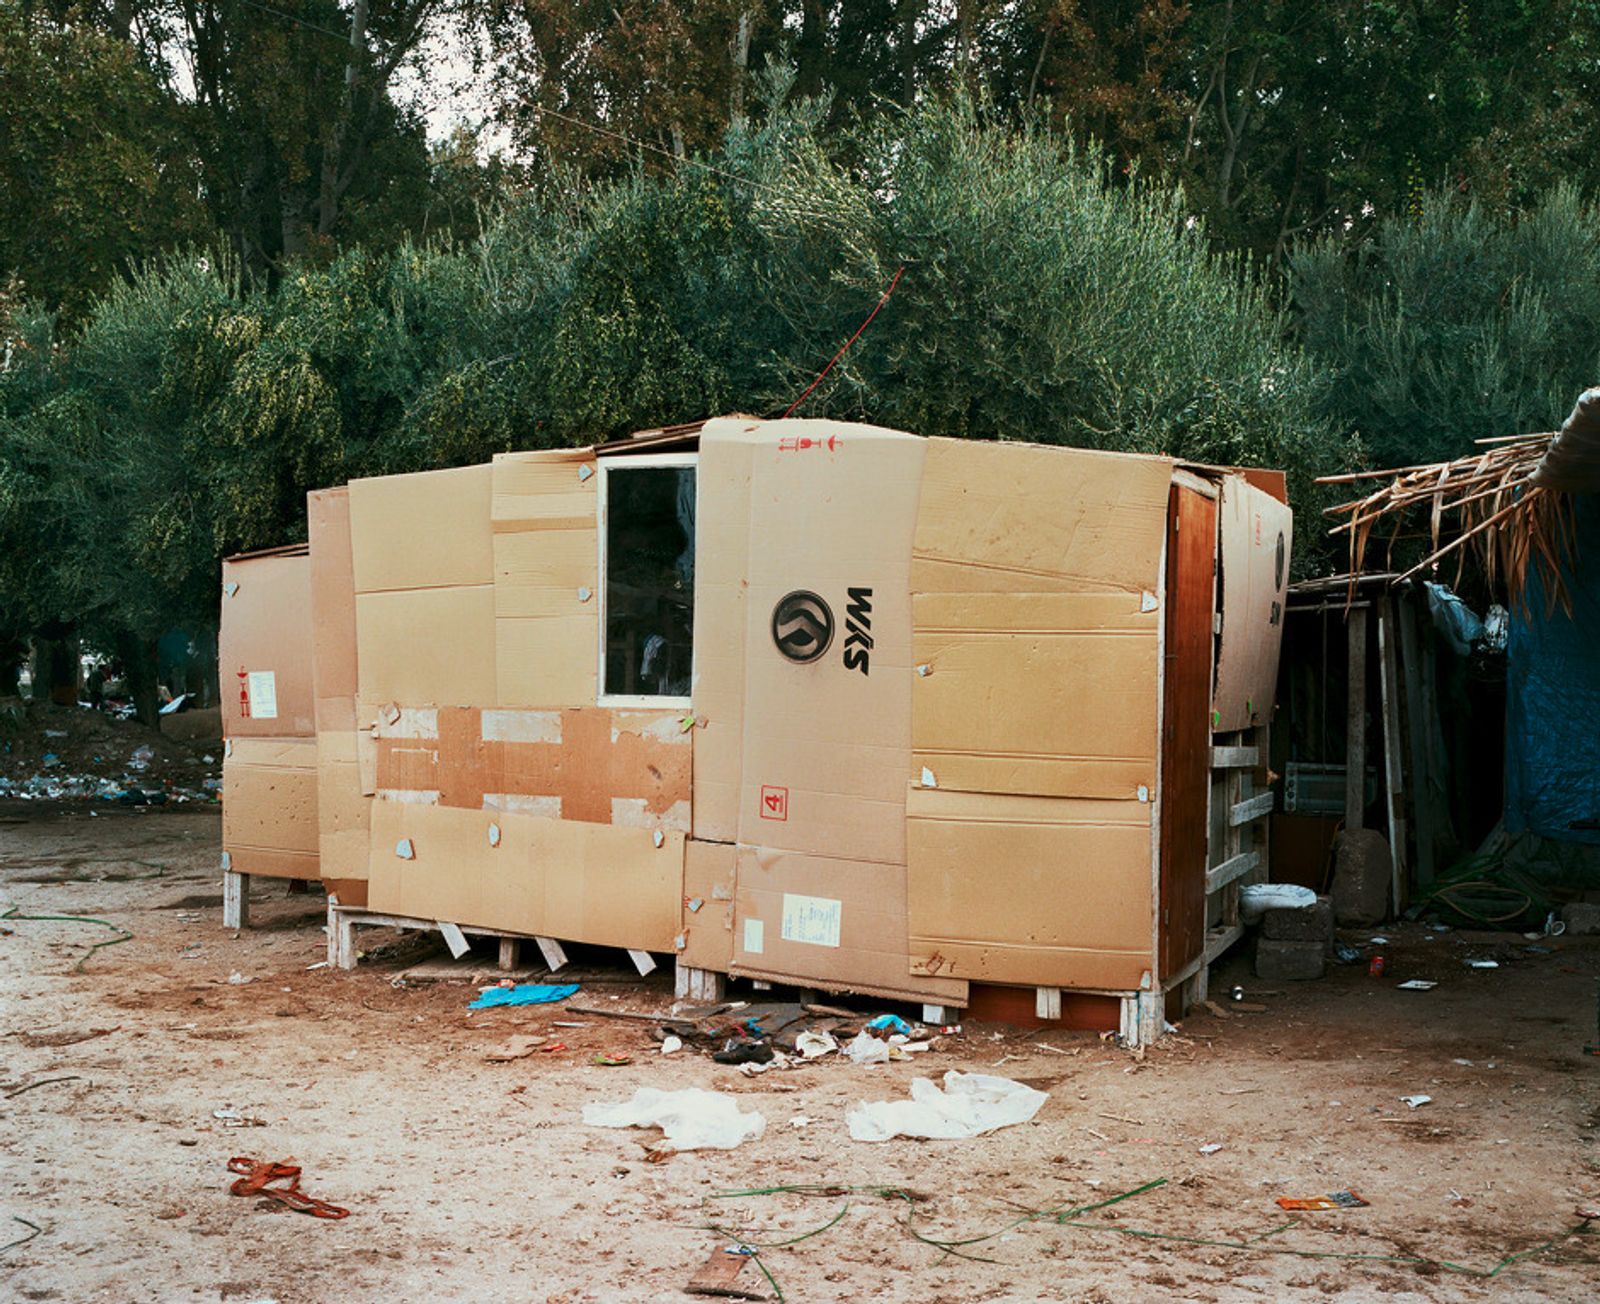 © Henk Wildschut - Shelter of Illegal immigrant in Greece